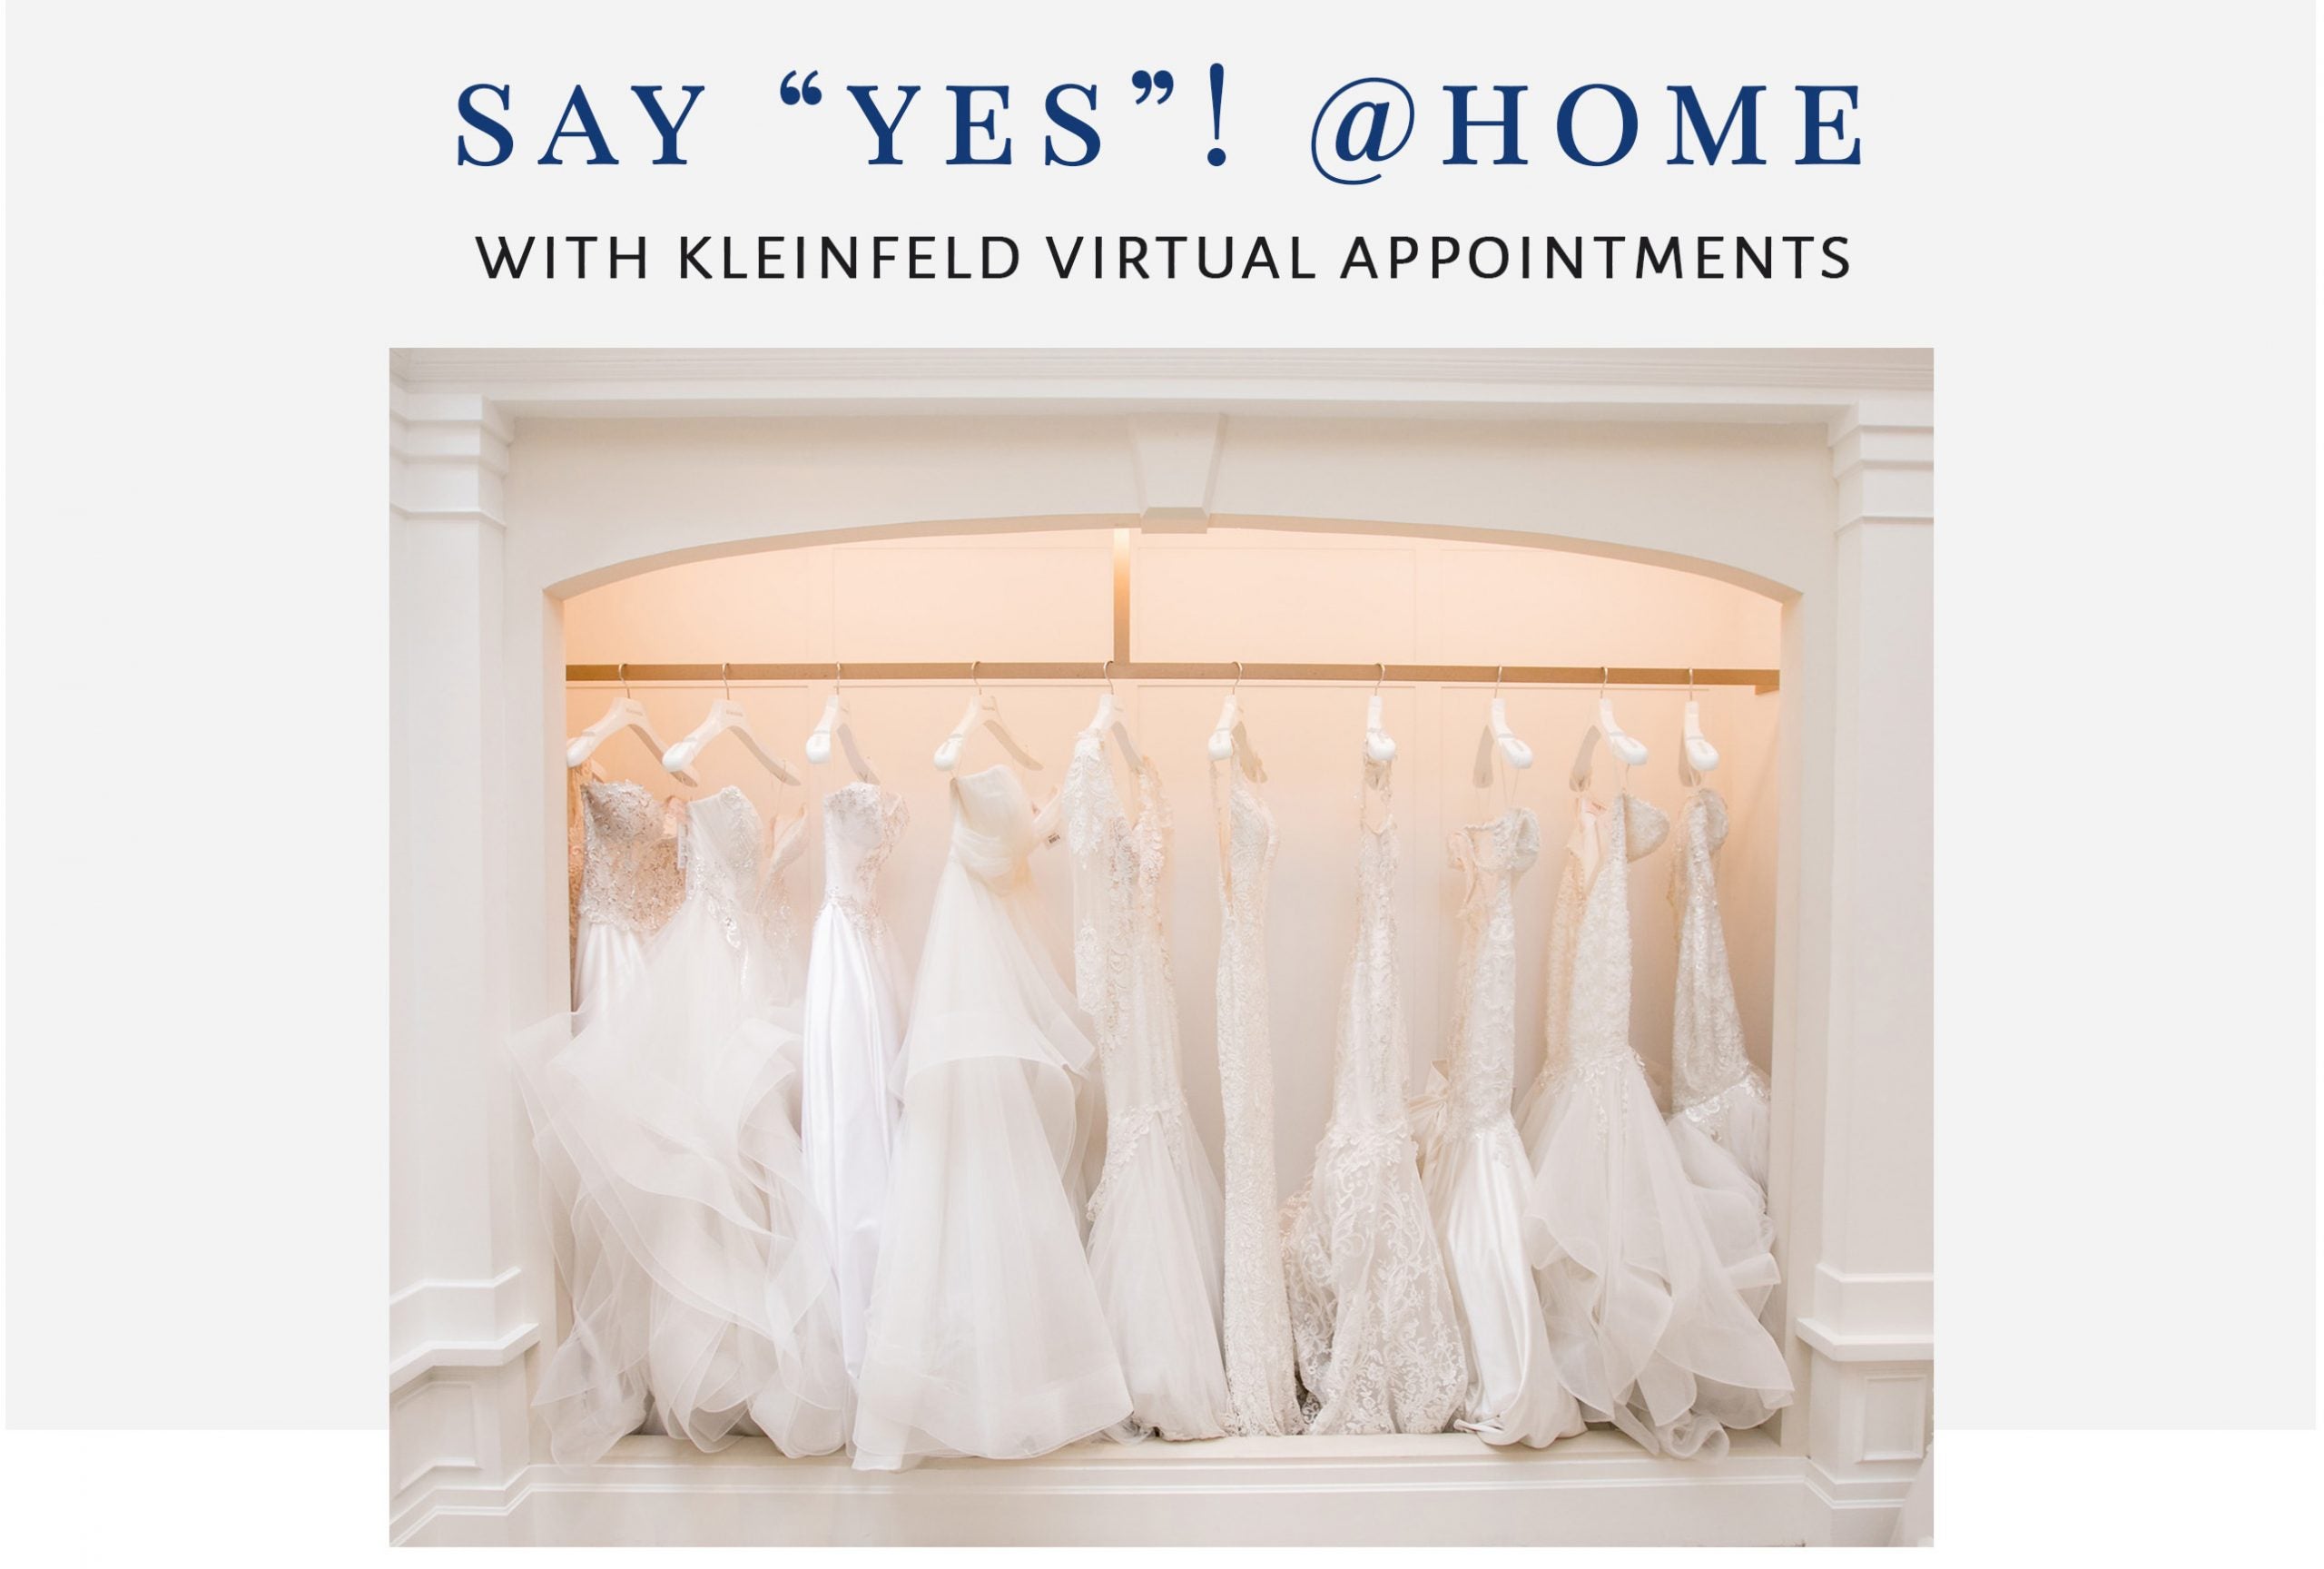 Kleinfeld Virtual Appointments